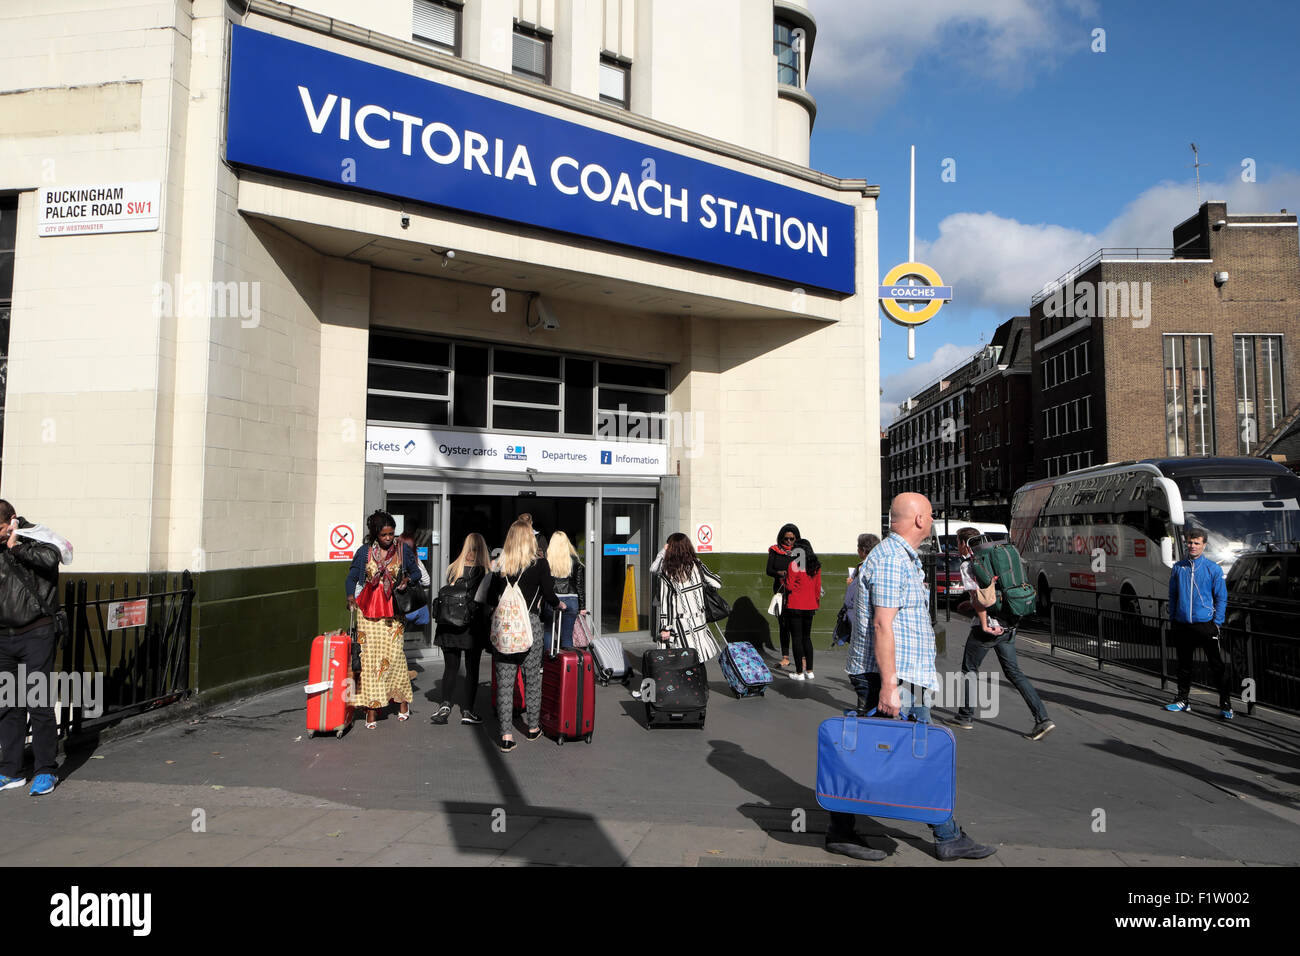 Travellers with luggage outside Victoria Coach Station building entrance and sign in London England UK   KATHY DEWITT Stock Photo